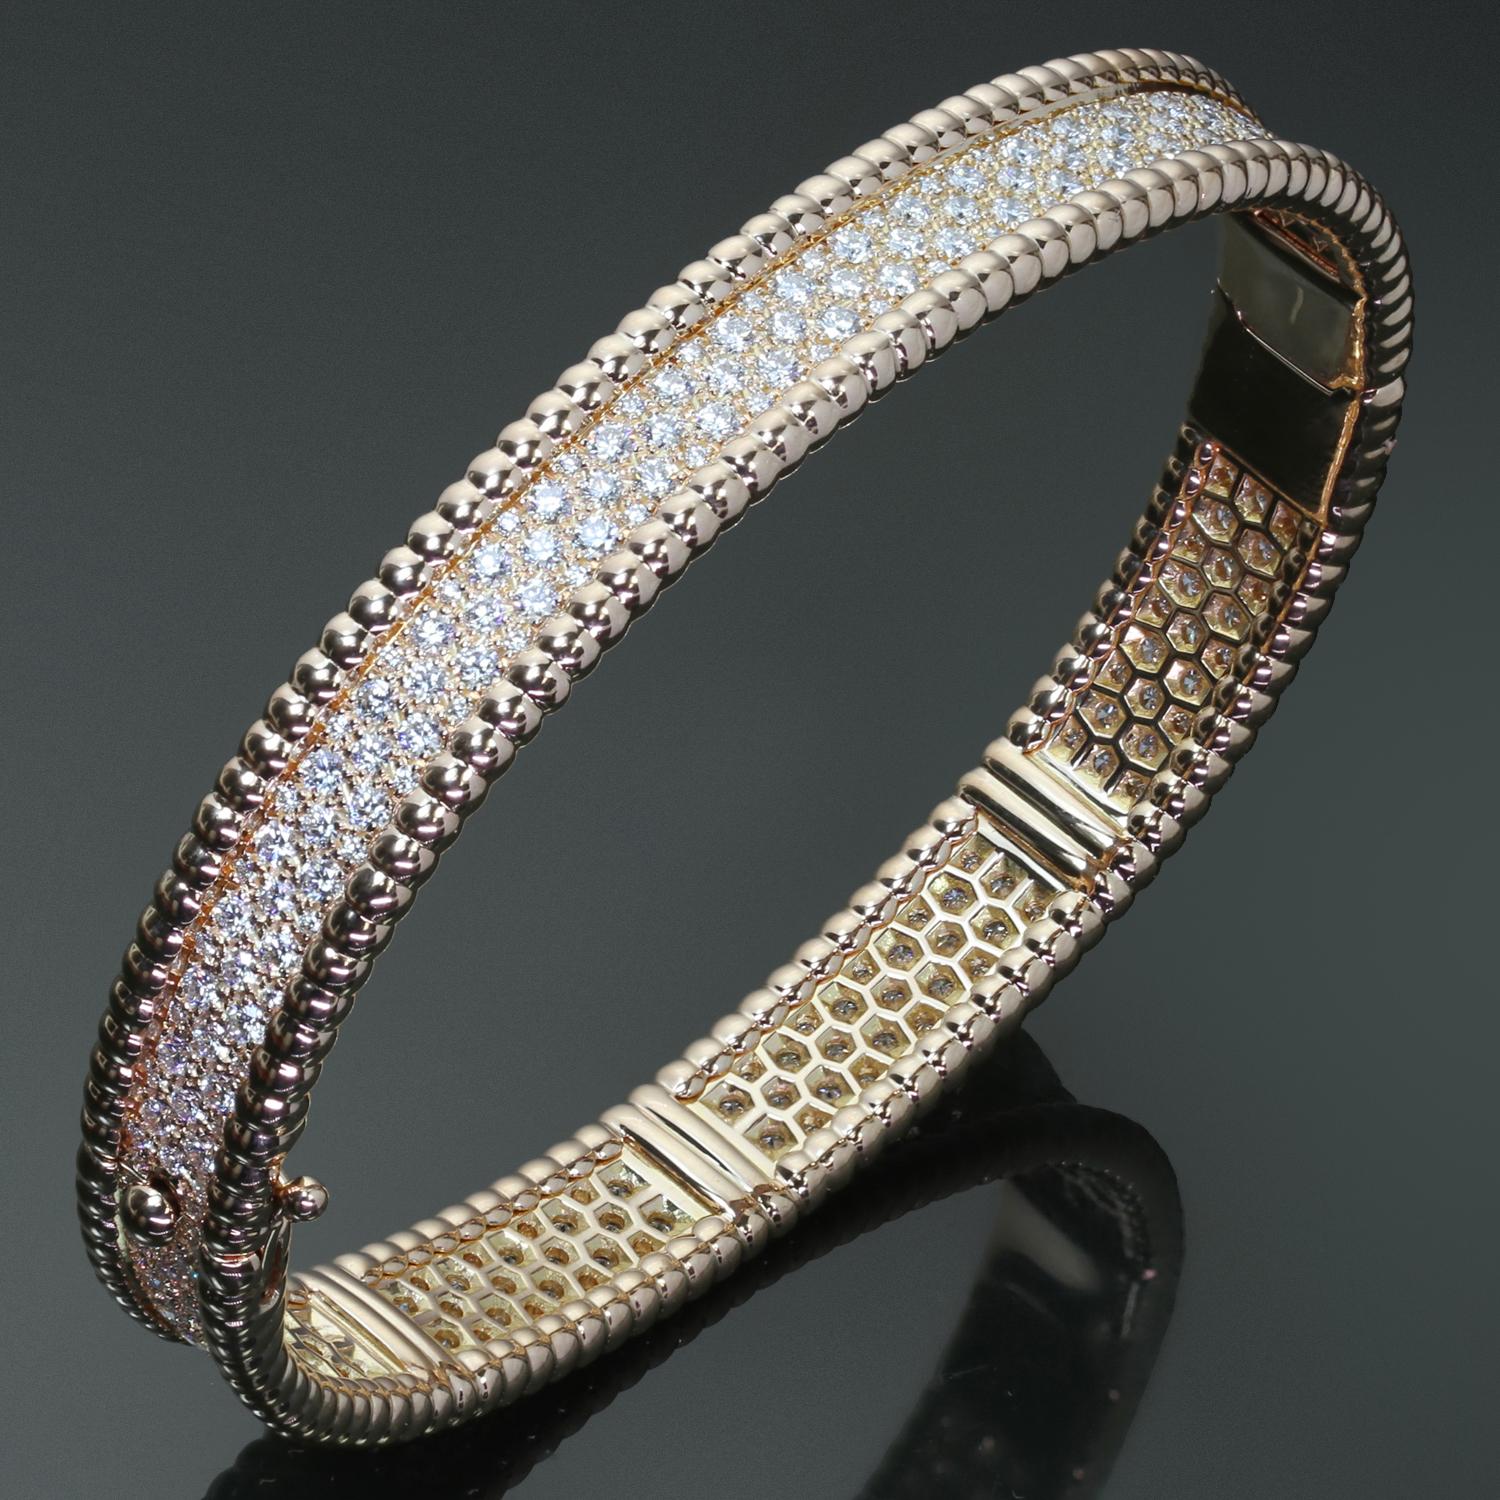 This gorgeous authentic Van Cleef & Arpels bangle from the classic Perlée collection is crafted in 18k rose gold and set with 3 rows of round brilliant D-E-F VVS1-VVS2 diamonds weighing an estimated 3.11 carats. Made in France circa 2010s.